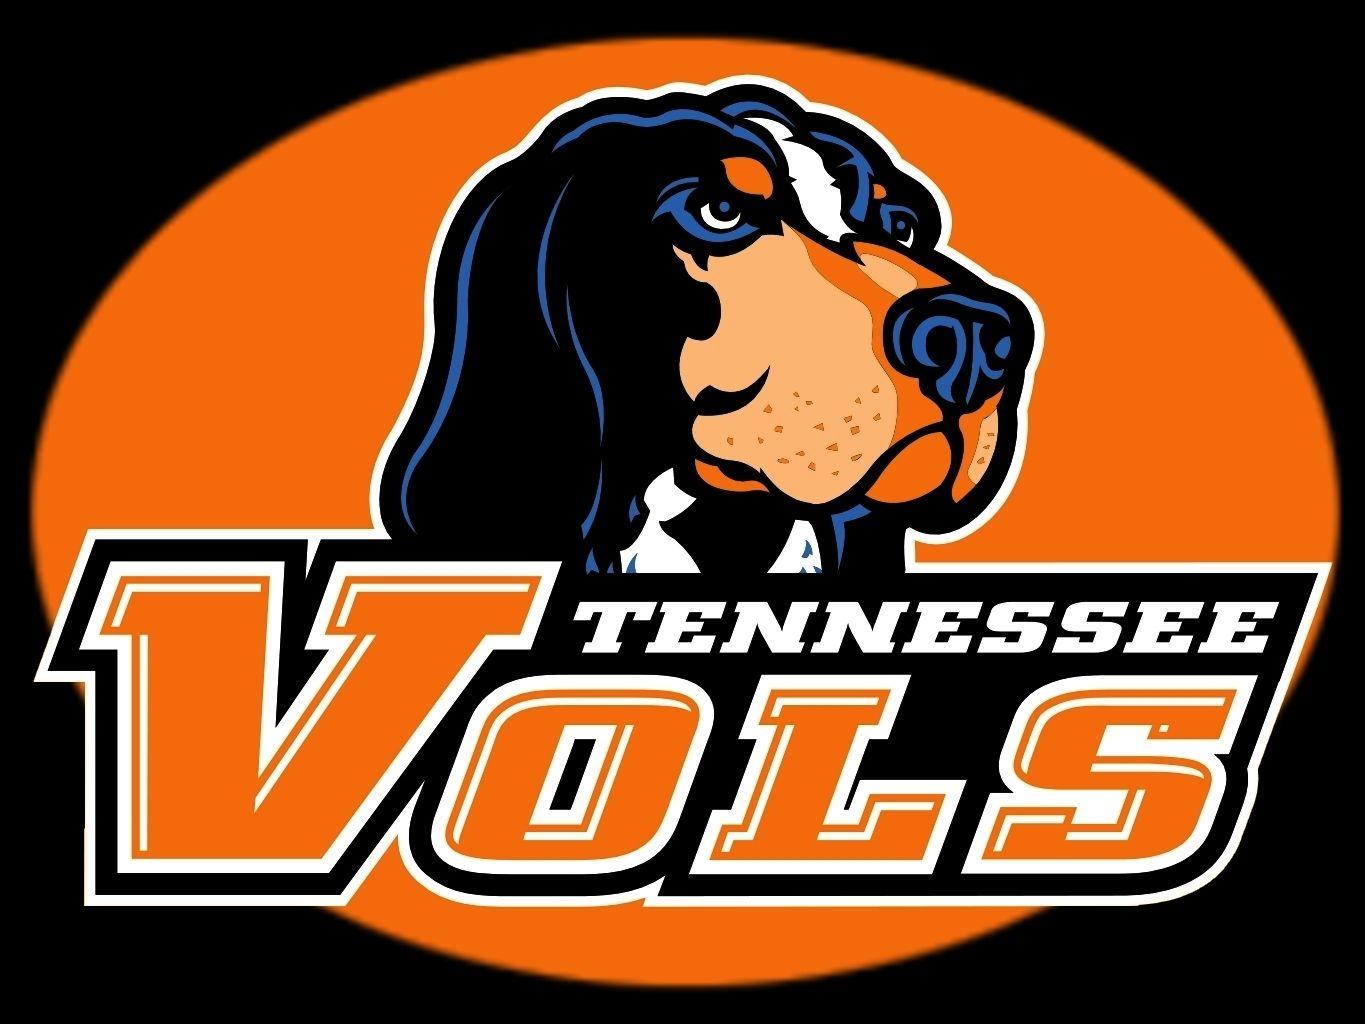 Tennessee Vols Wallpaper or